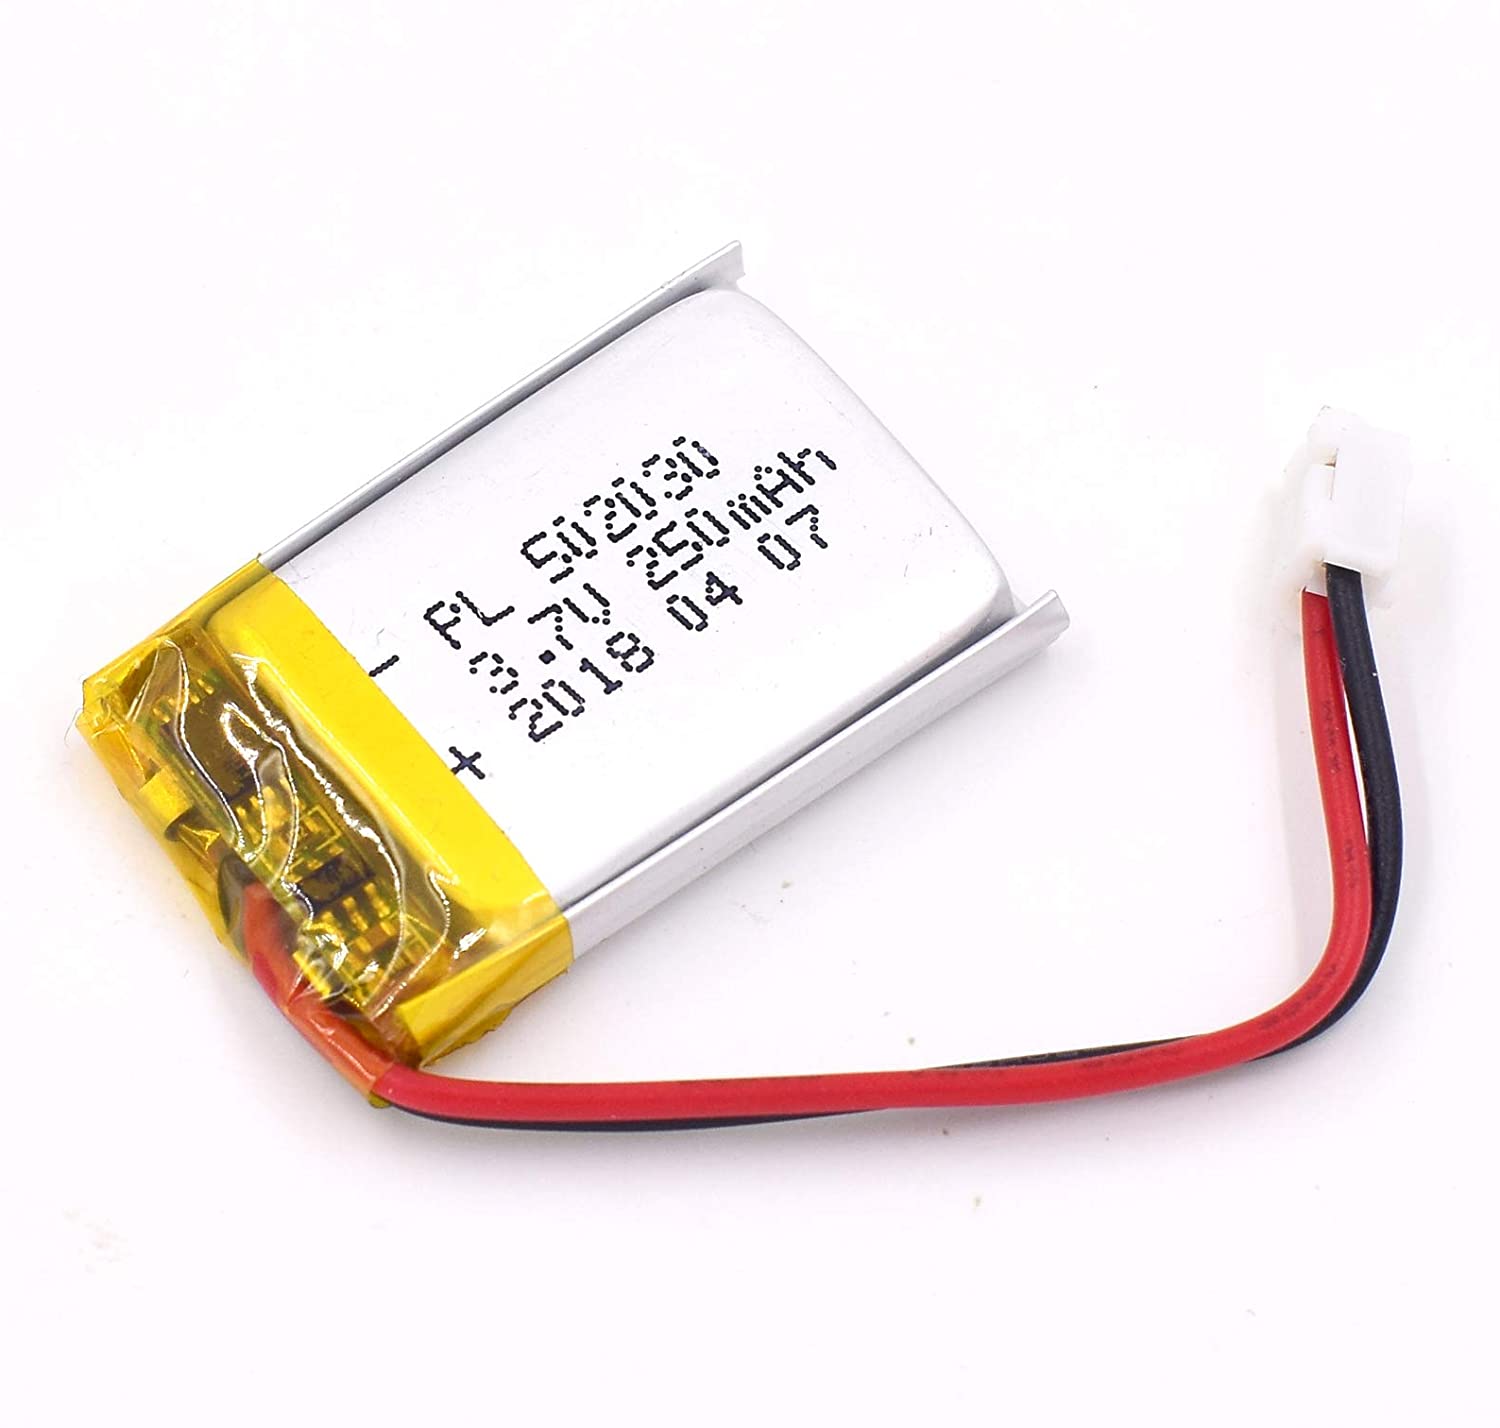 YDL 3.7V 250mAh 502030 Rechargeable Lipo Battery with JST Connector - YDL Battery